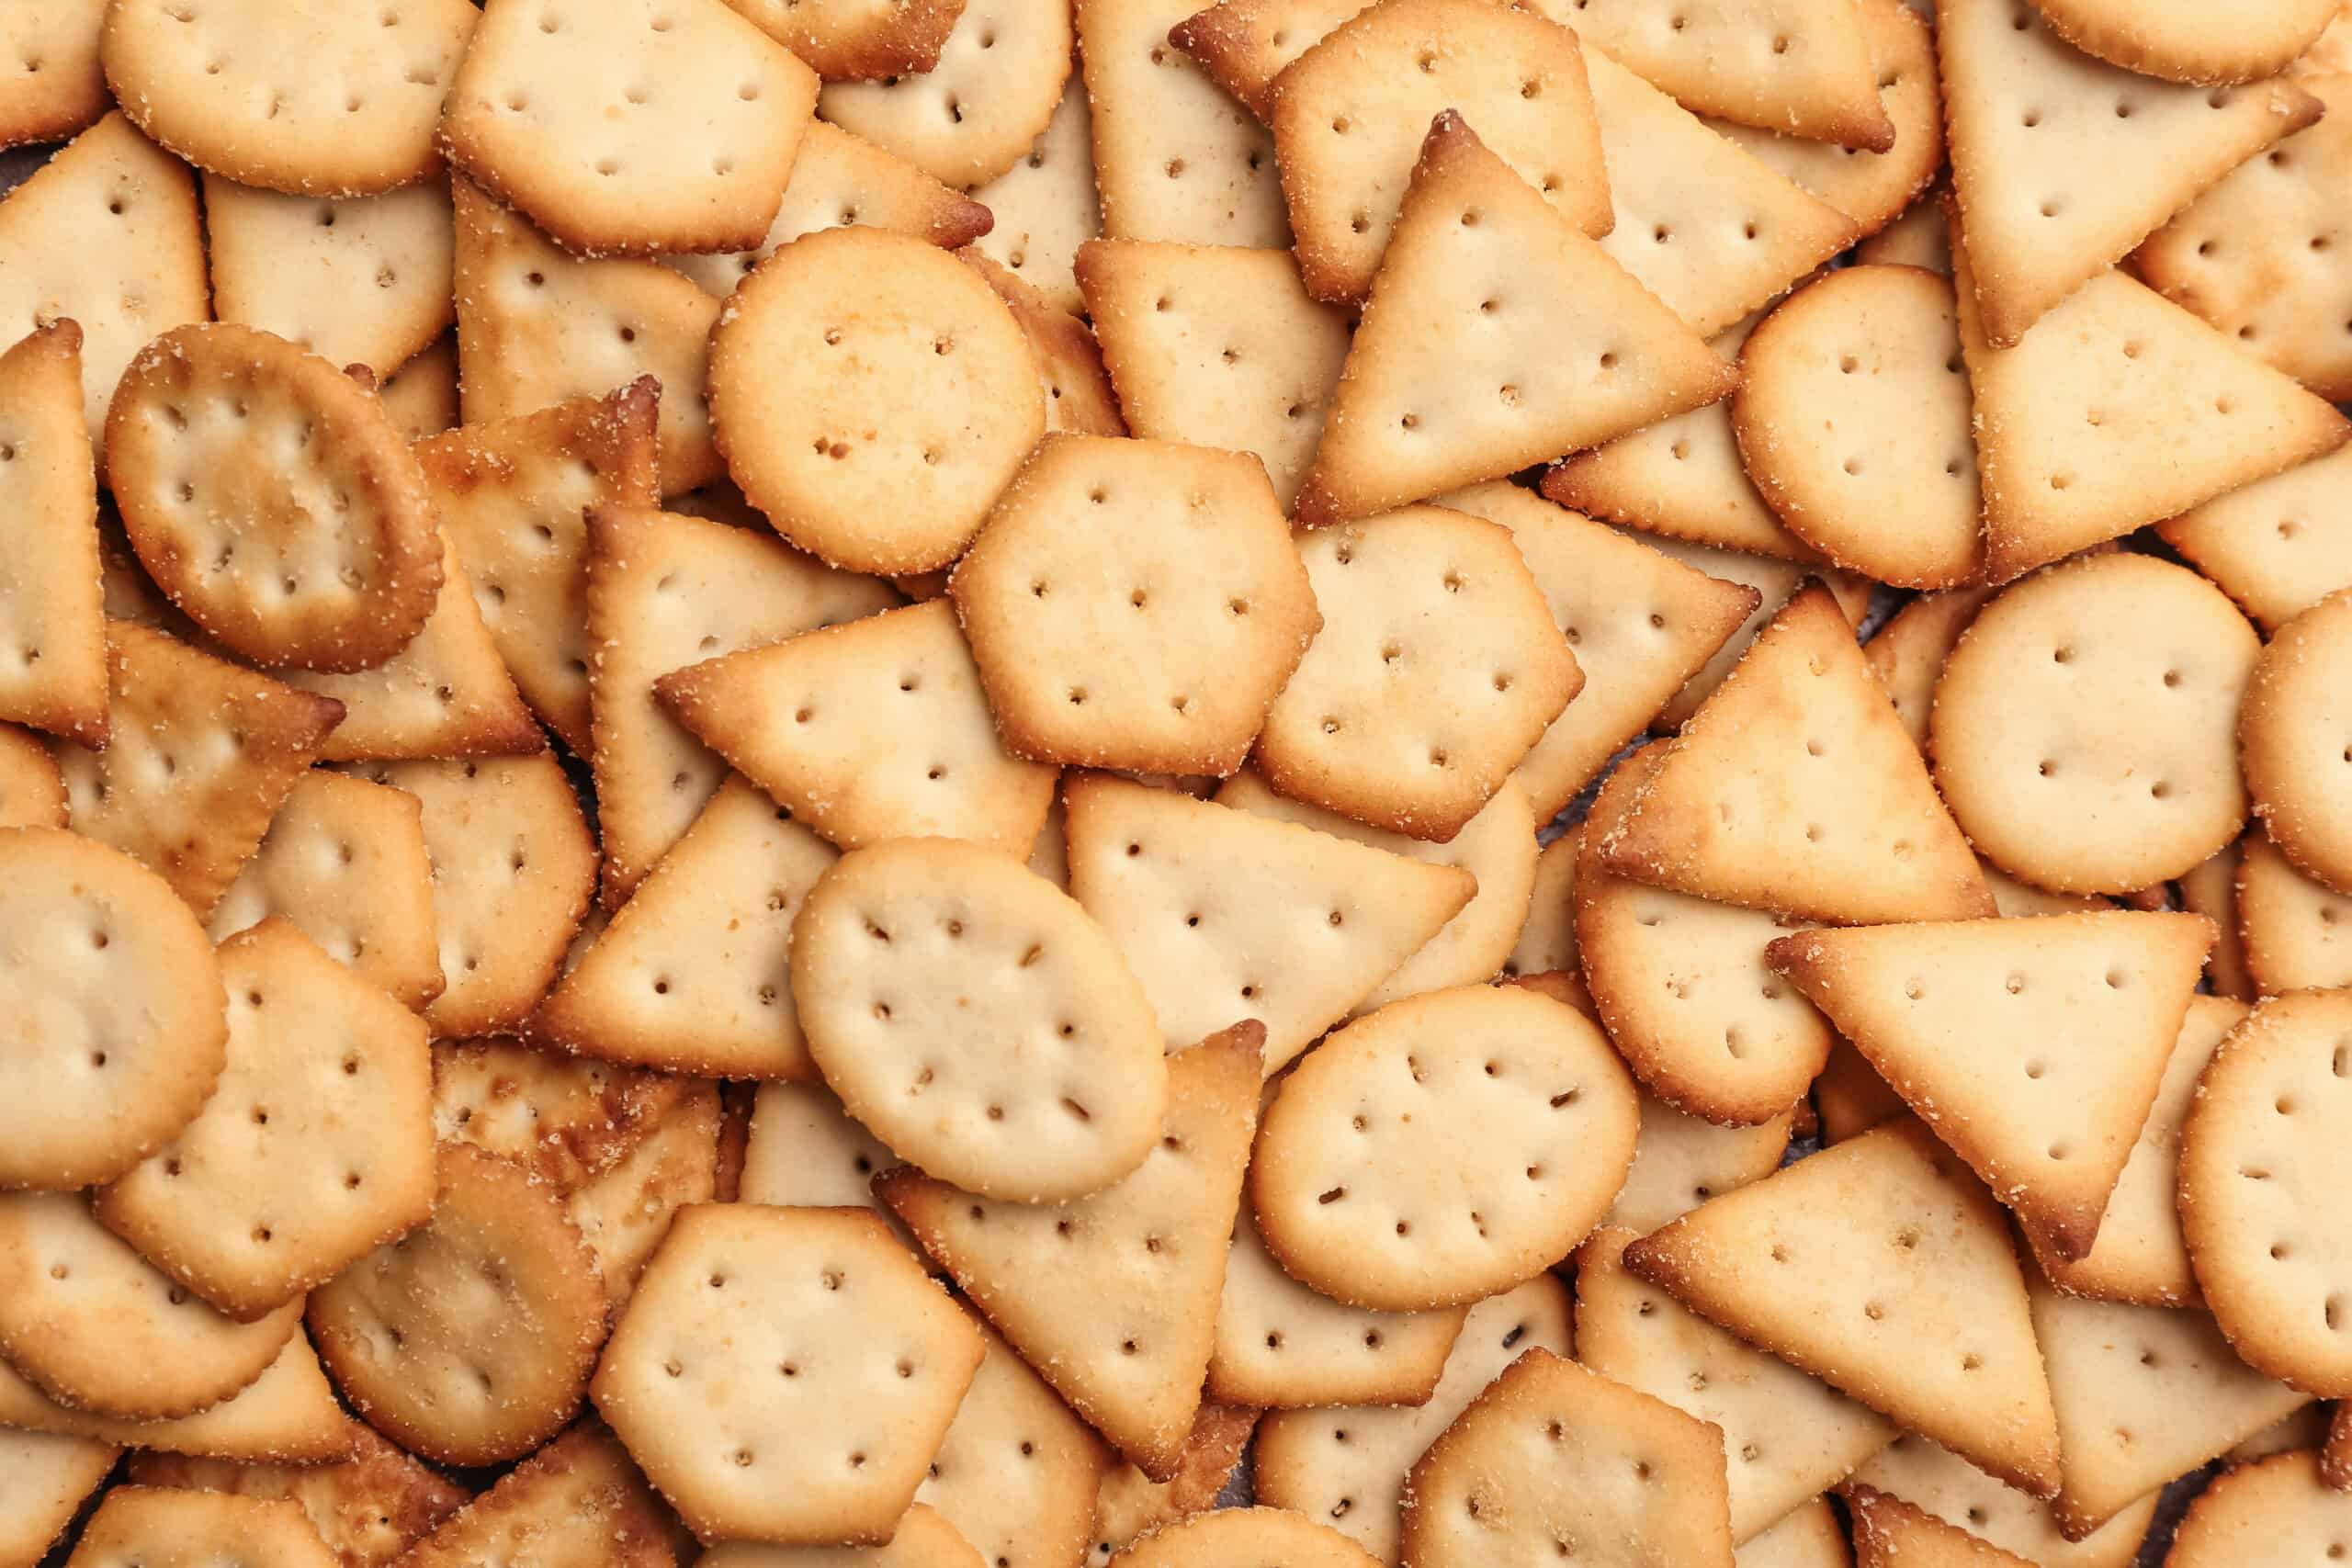 Can Dogs Eat Crackers Safely? What Are The Risks? - AZ Animals